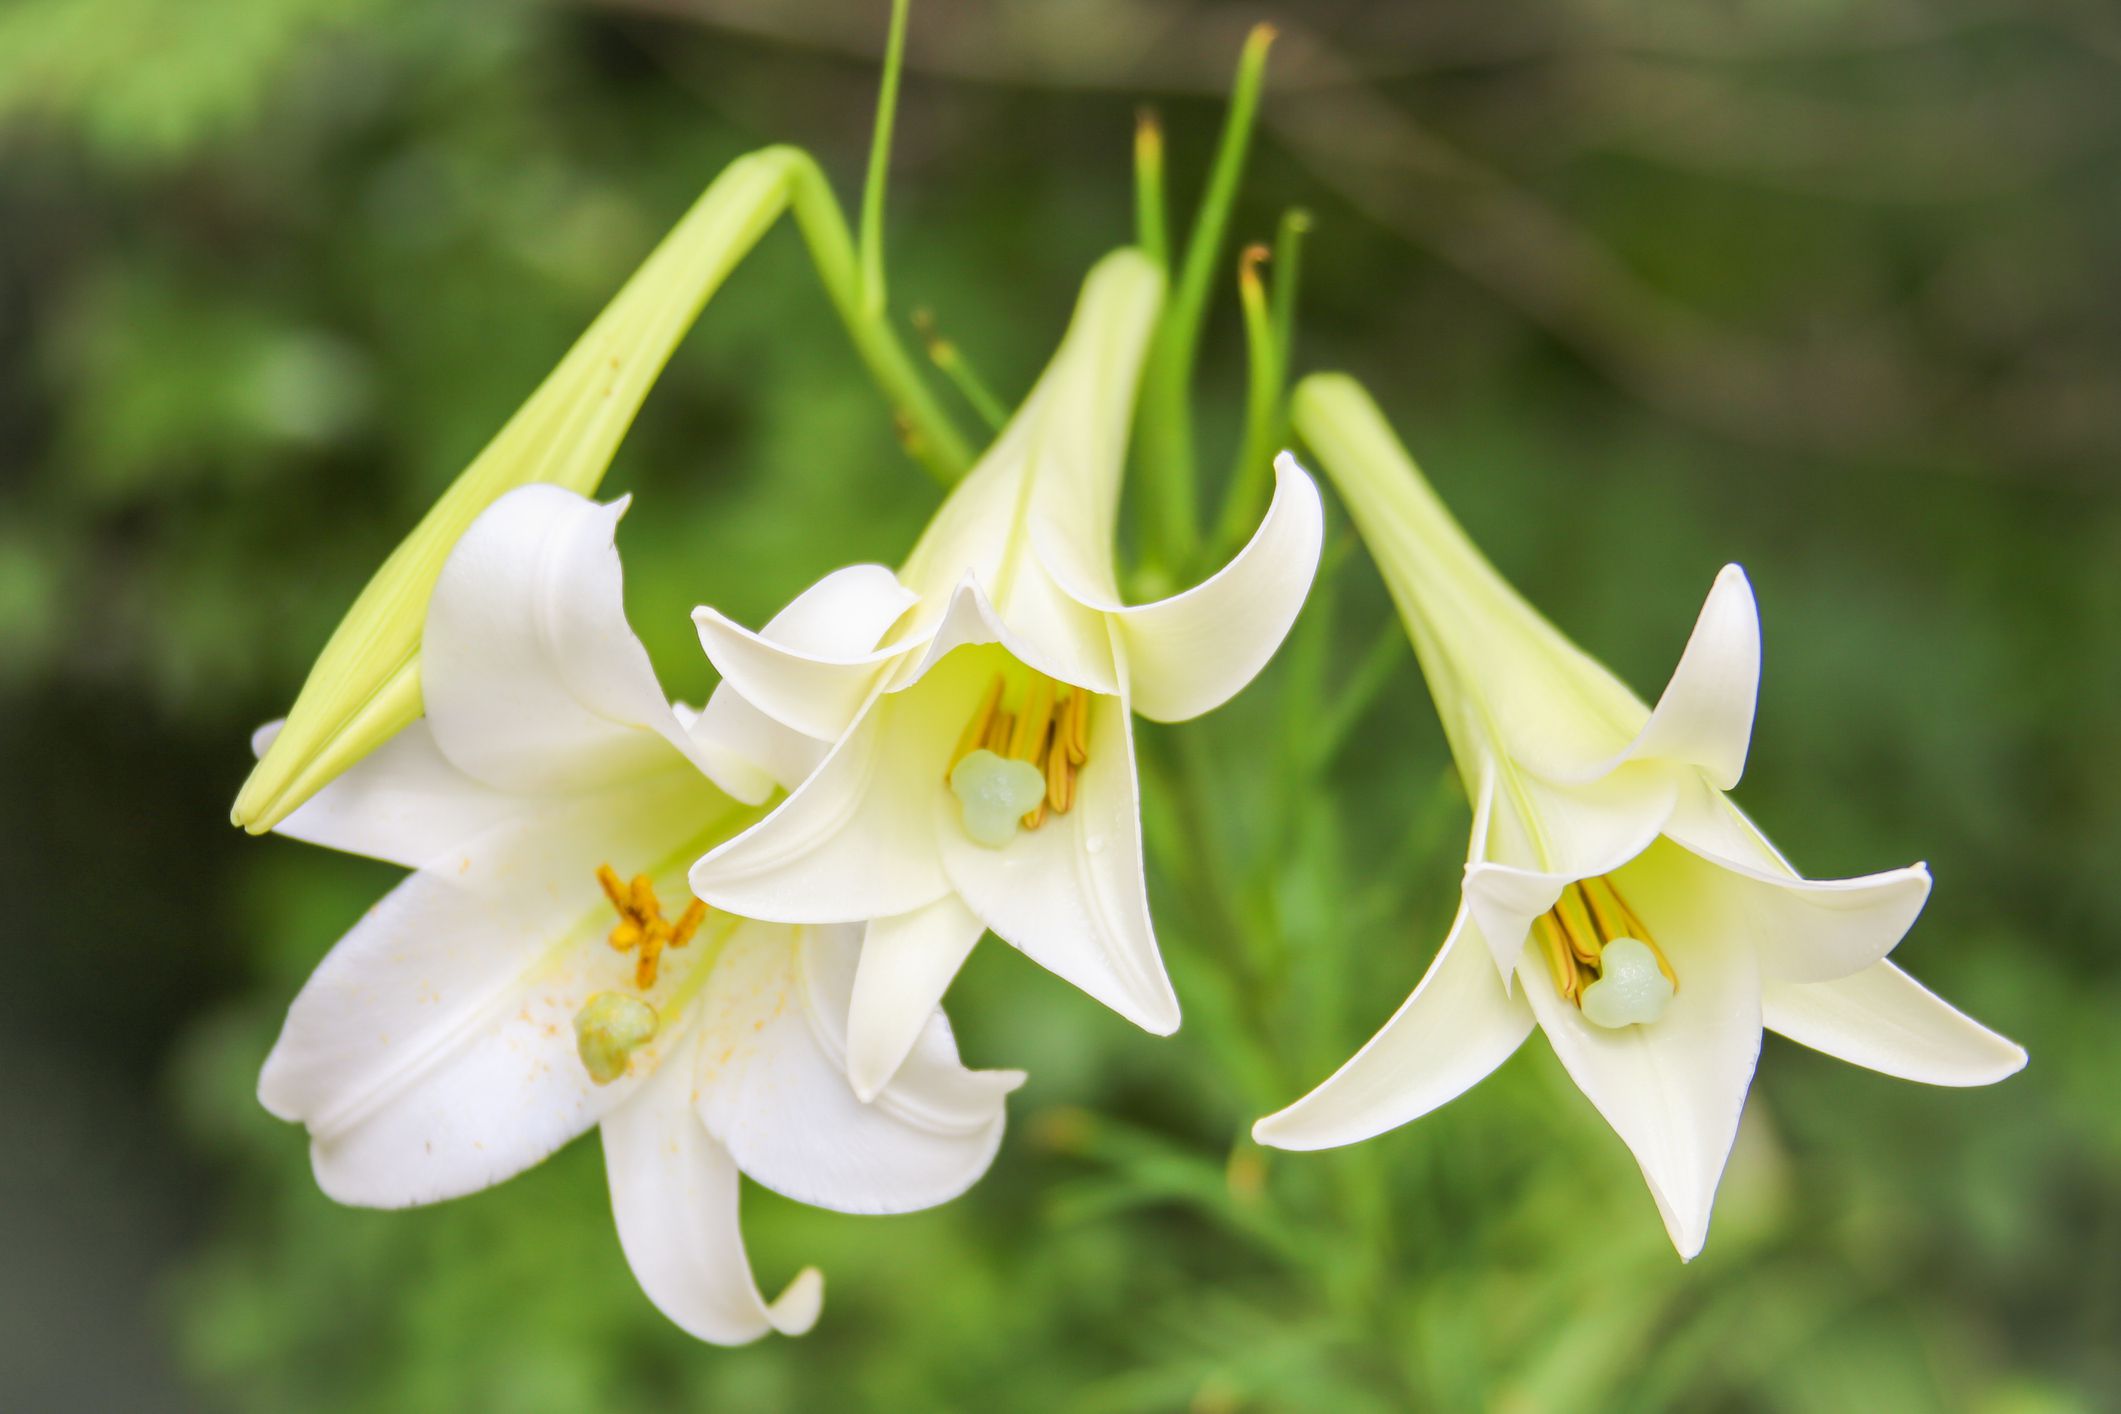 Easter Lilies - Selection, Care, and Re-Blooming